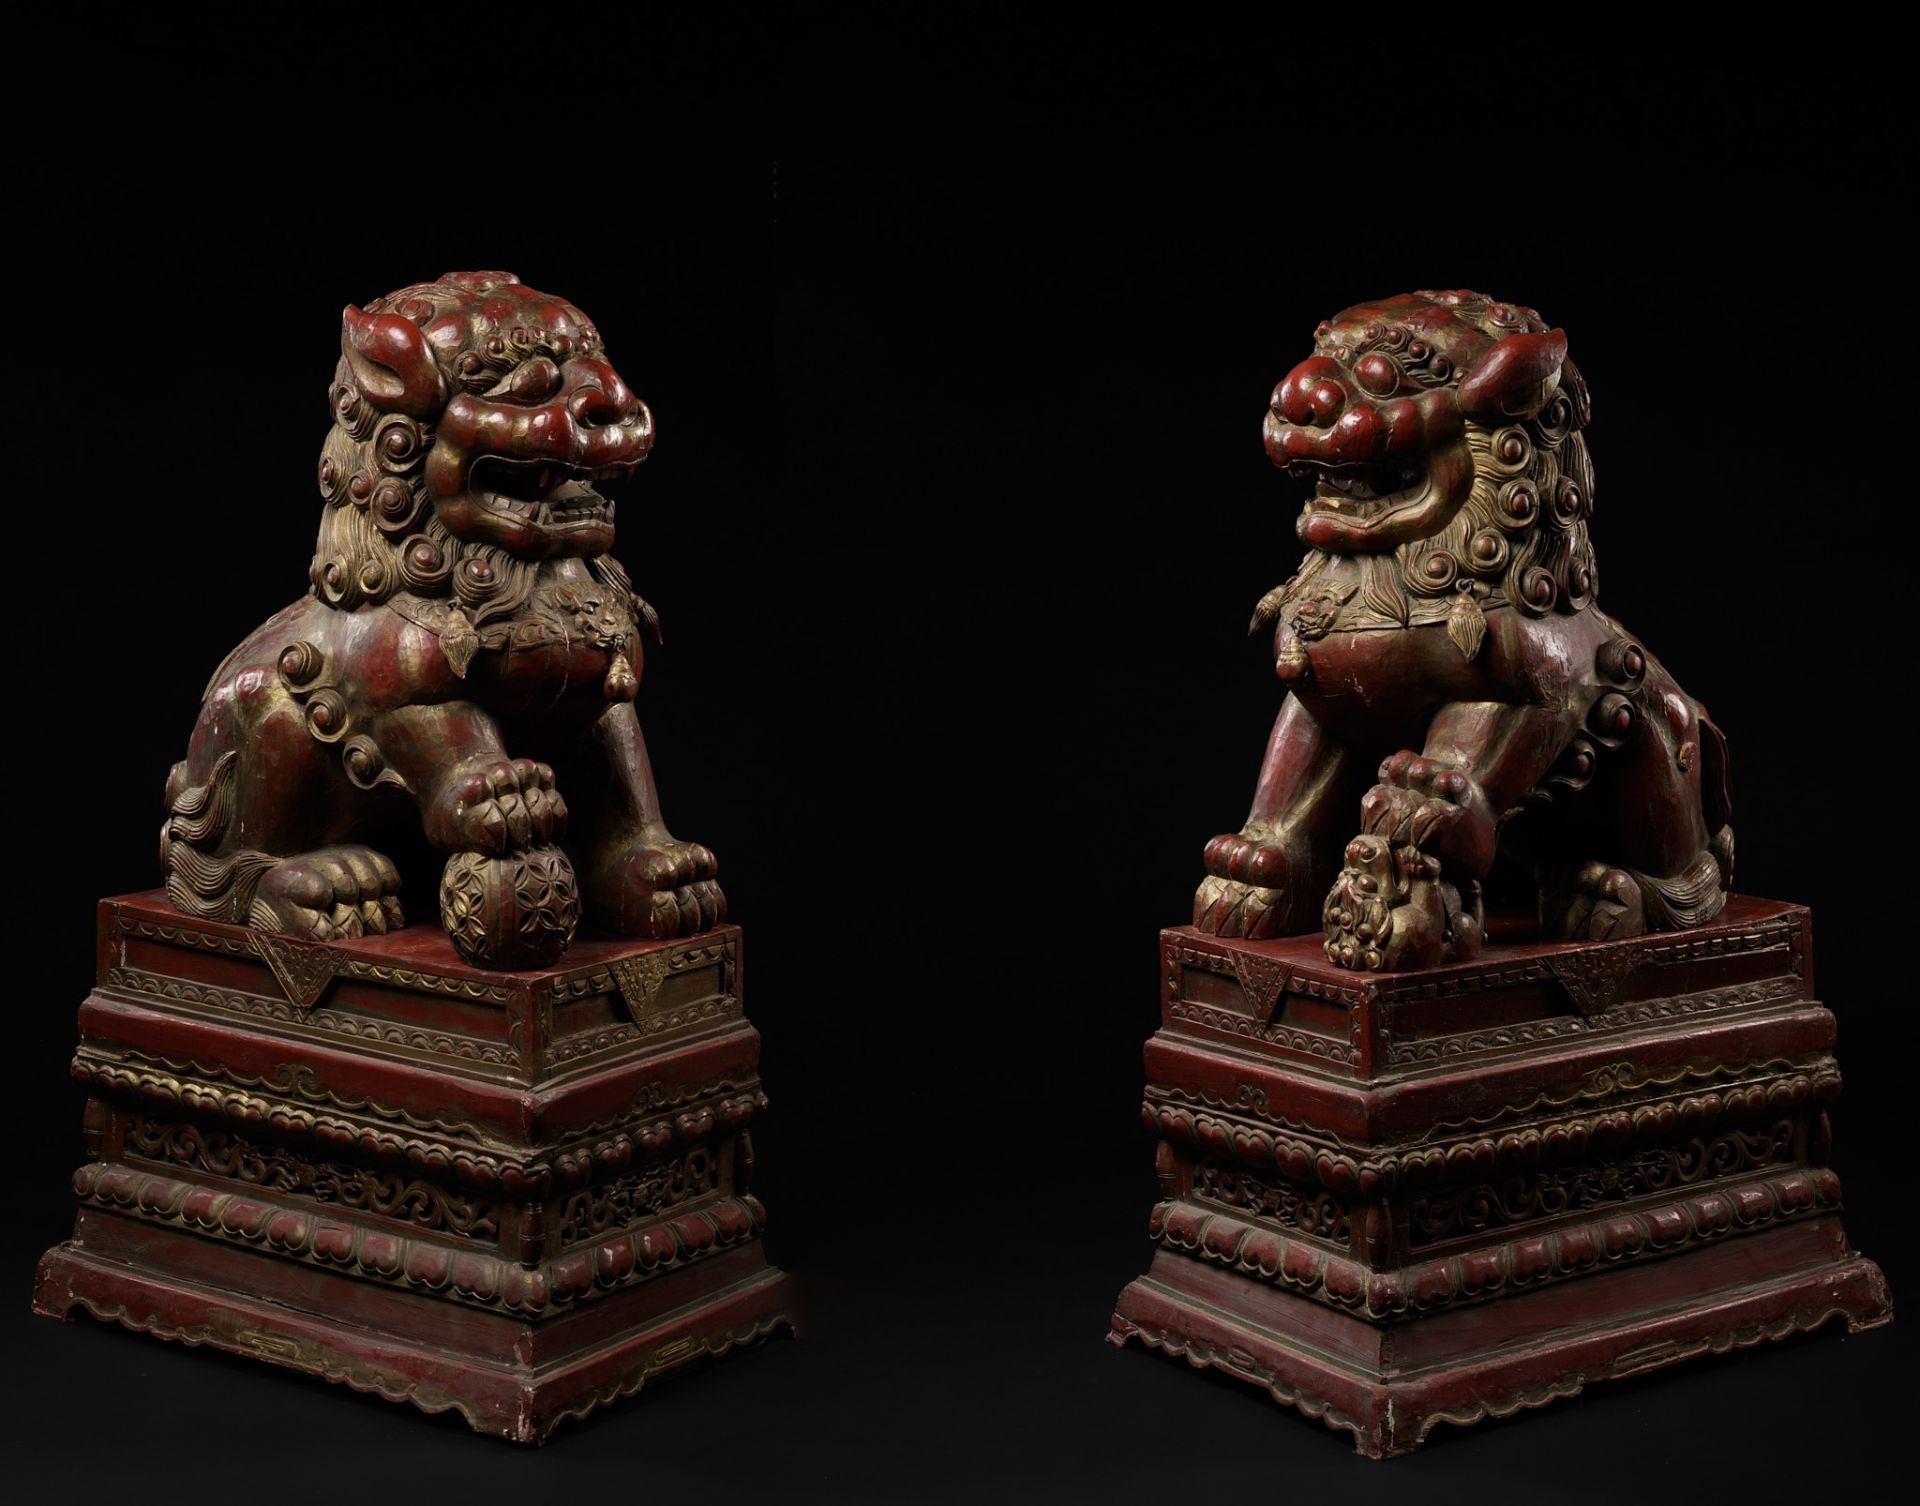 A PAIR OF MONUMENTAL GILT AND RED LACQUERED WOOD FIGURES OF BUDDHIST LIONS, LATE QING DYNASTY